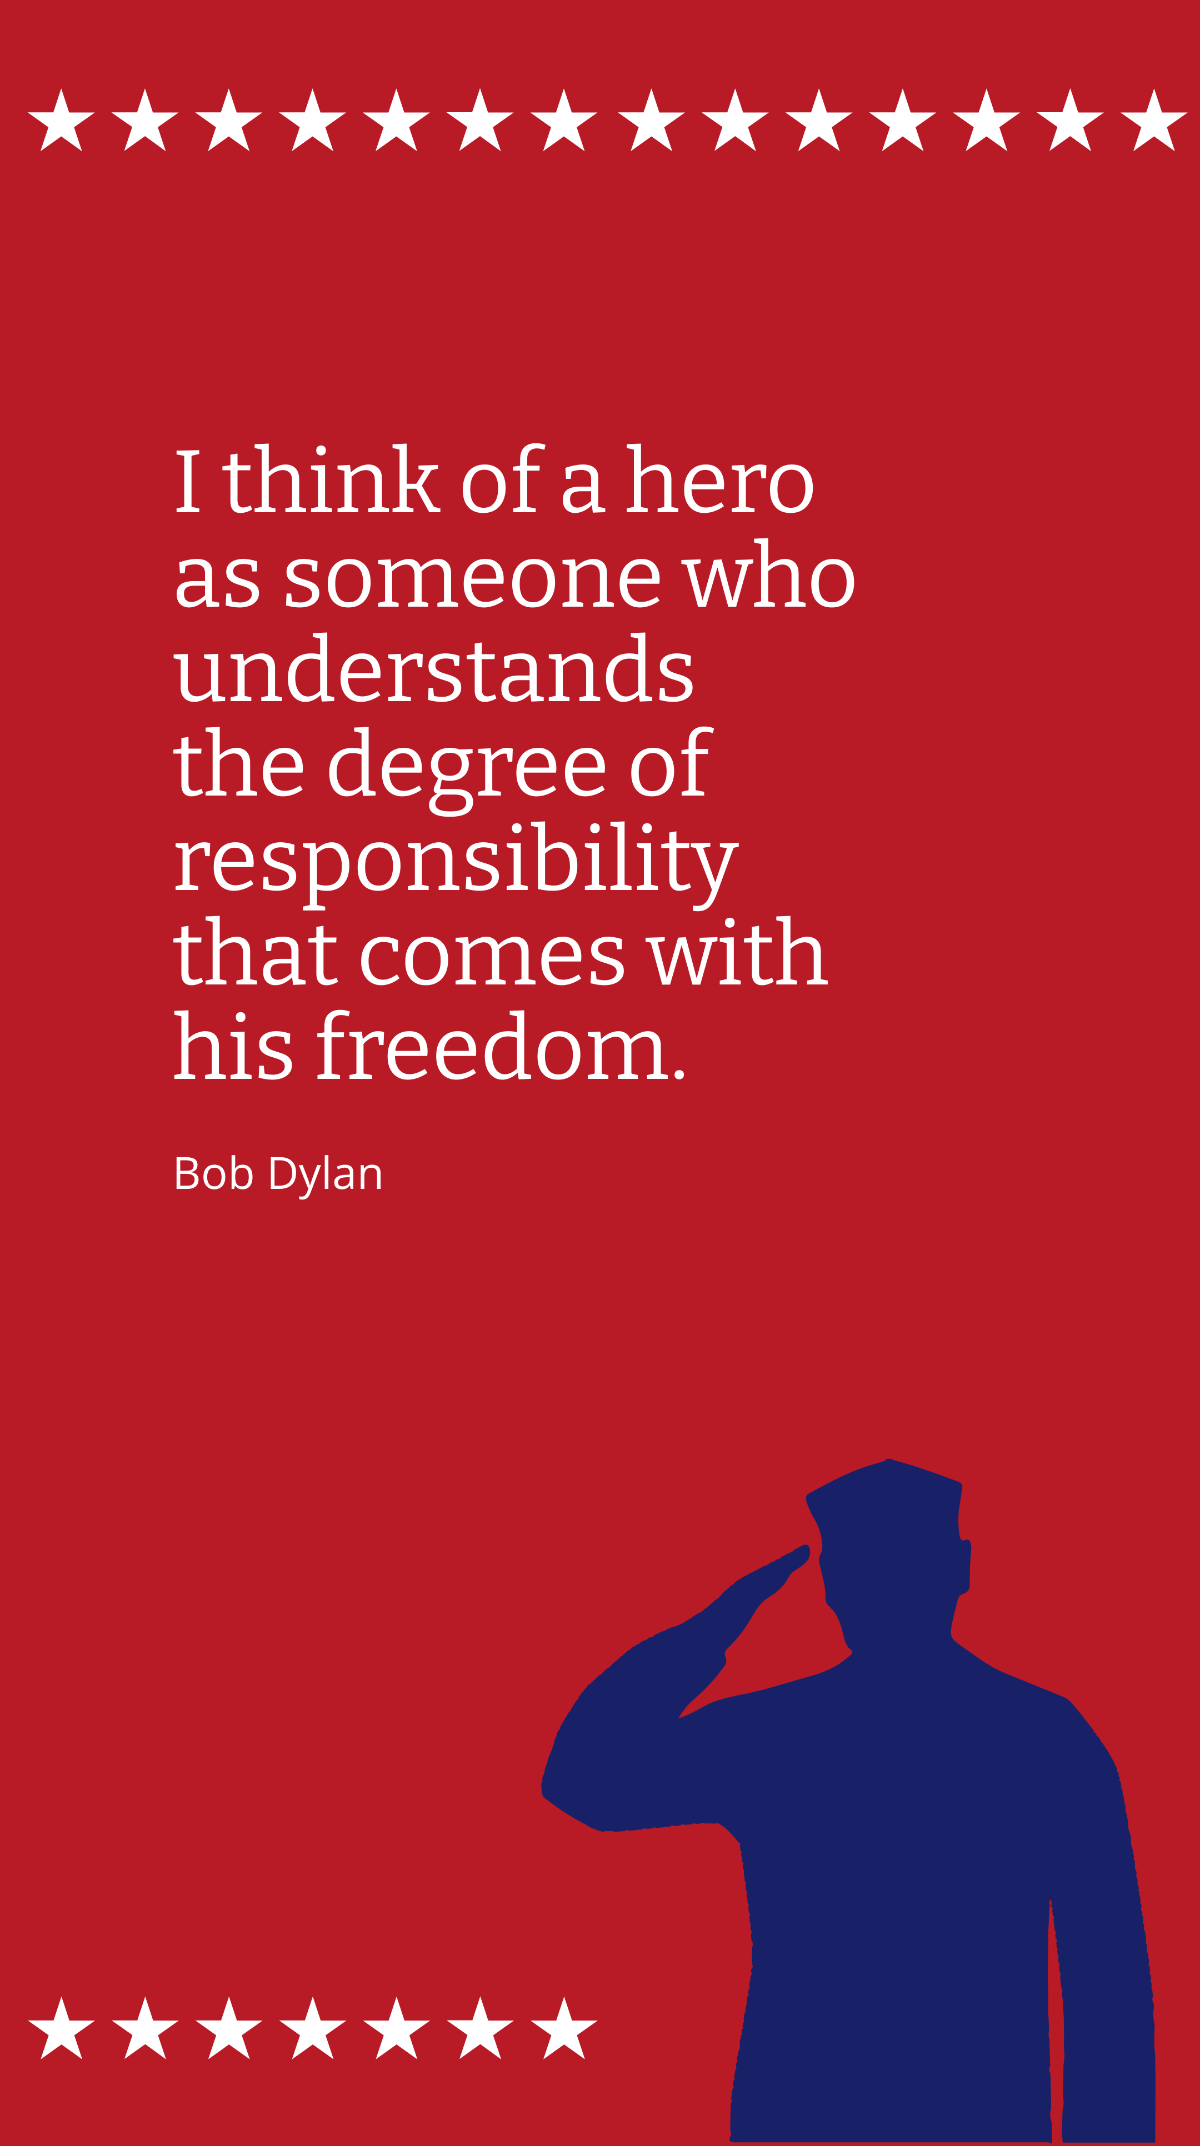 Bob Dylan - I think of a hero as someone who understands the degree of responsibility that comes with his freedom Template